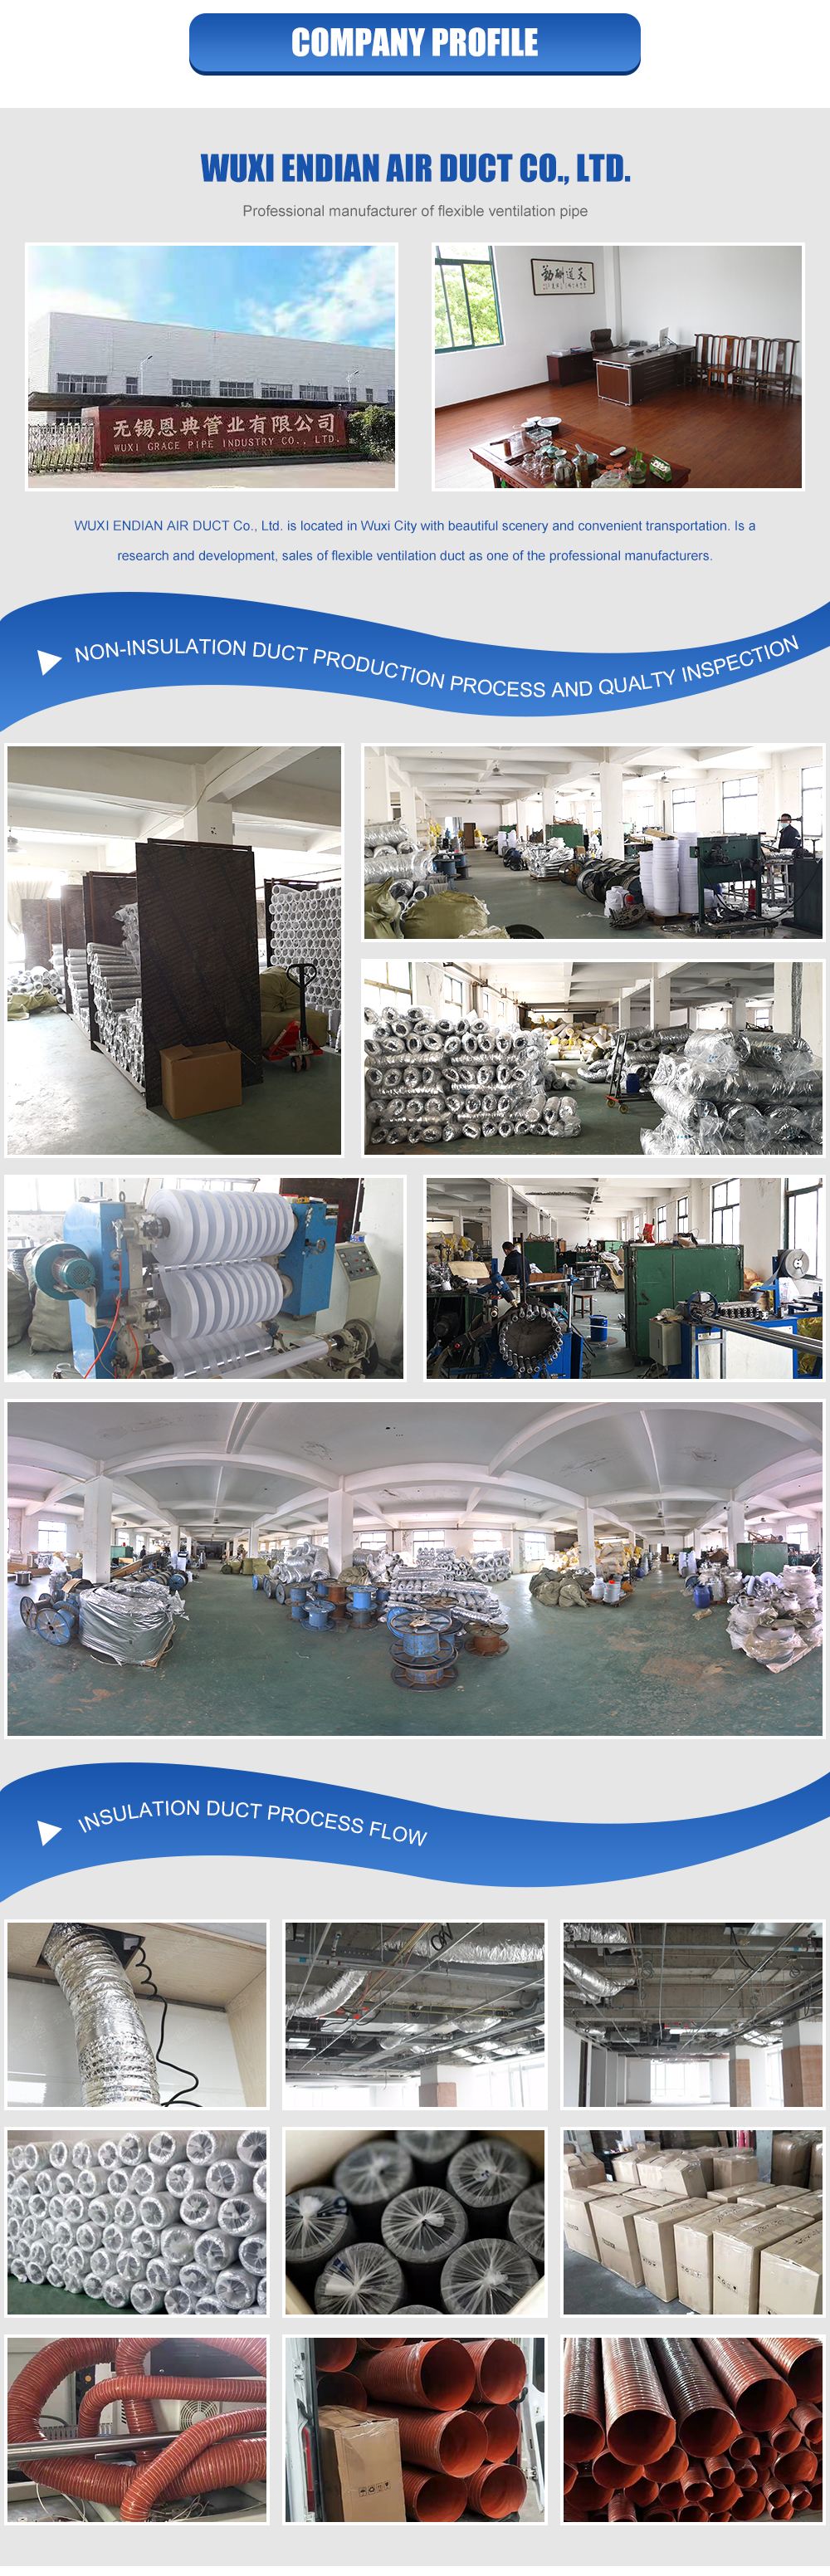 hvac equipmentventilation pipe  heat recovery ventilation systemHVAC uvcentral heating system with radiators